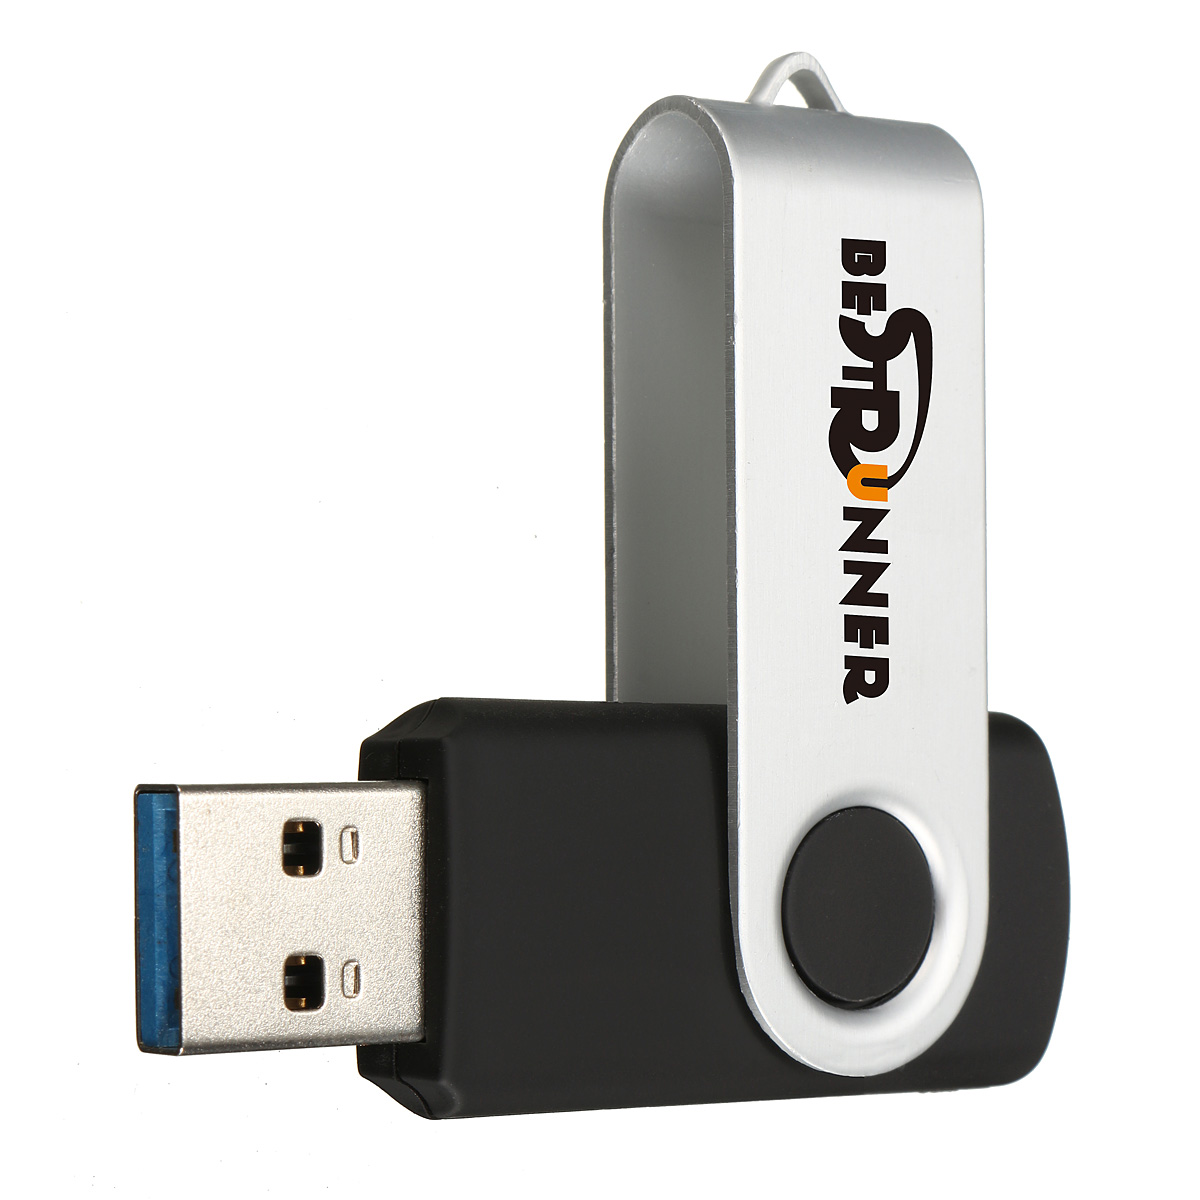 Find Bestrunner 32G USB3 0 Flash Drives 360 Rotation Pen Drive Memory U Disk for Sale on Gipsybee.com with cryptocurrencies